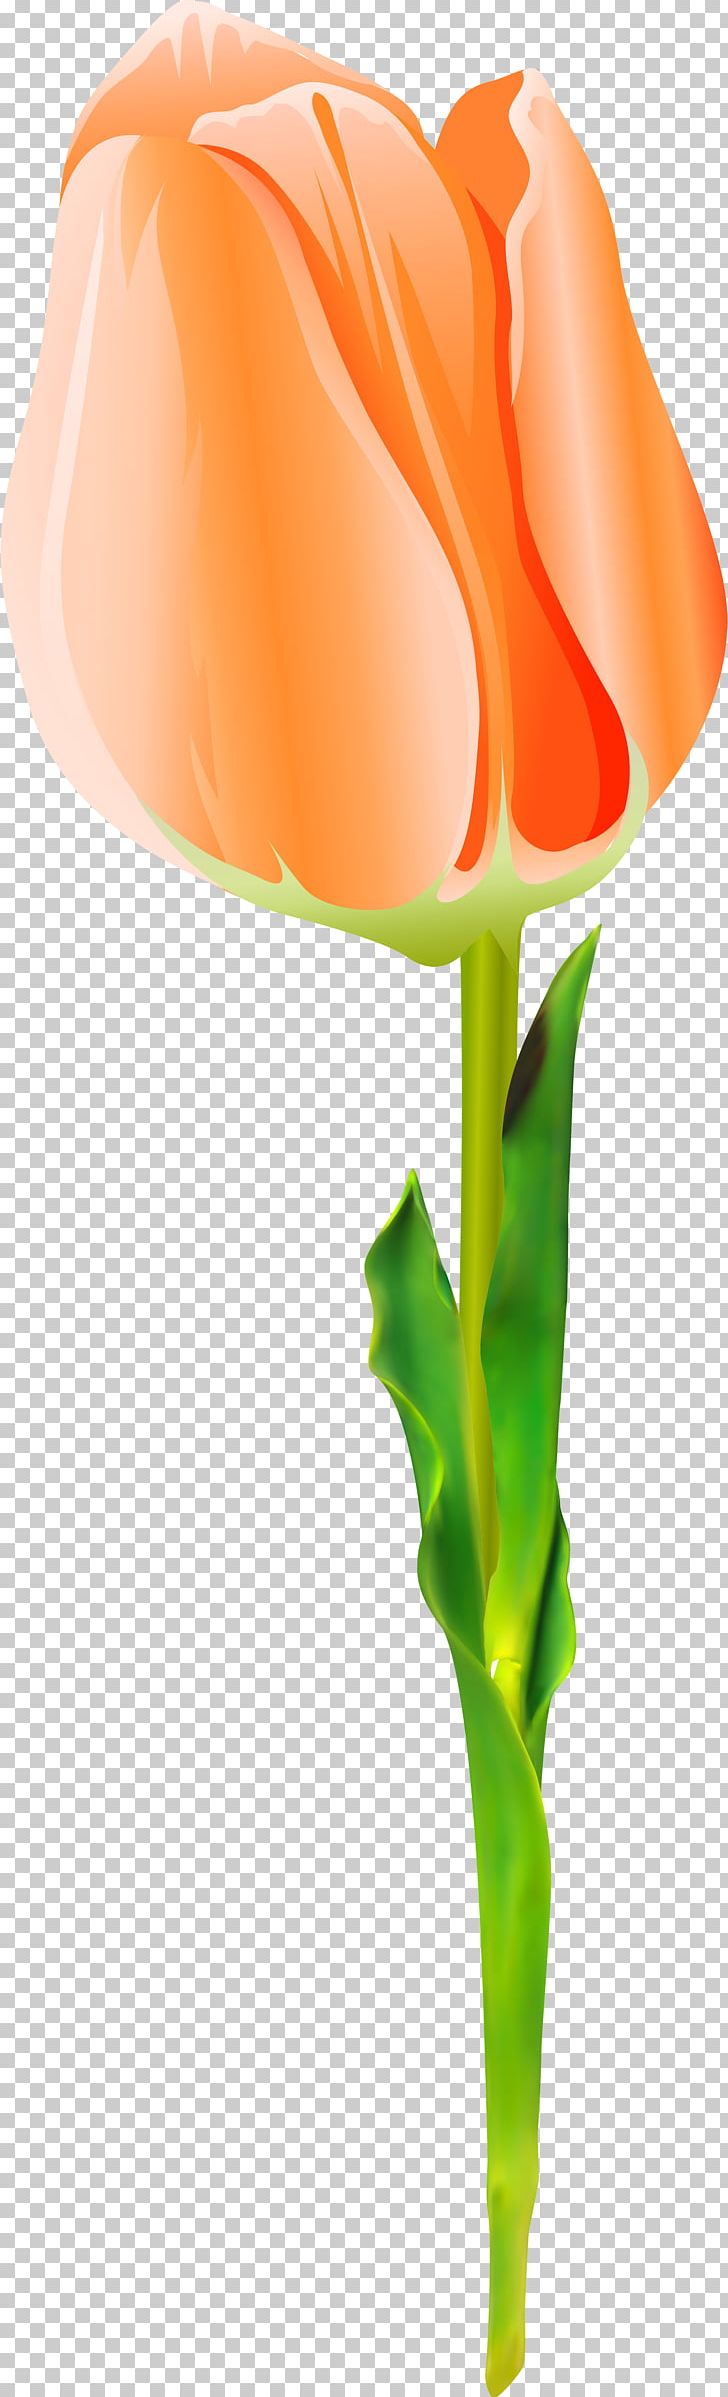 Flowering Plant Cut Flowers Plant Stem PNG, Clipart, Cut Flowers, Flower, Flowering Plant, Flowers, Orange Free PNG Download